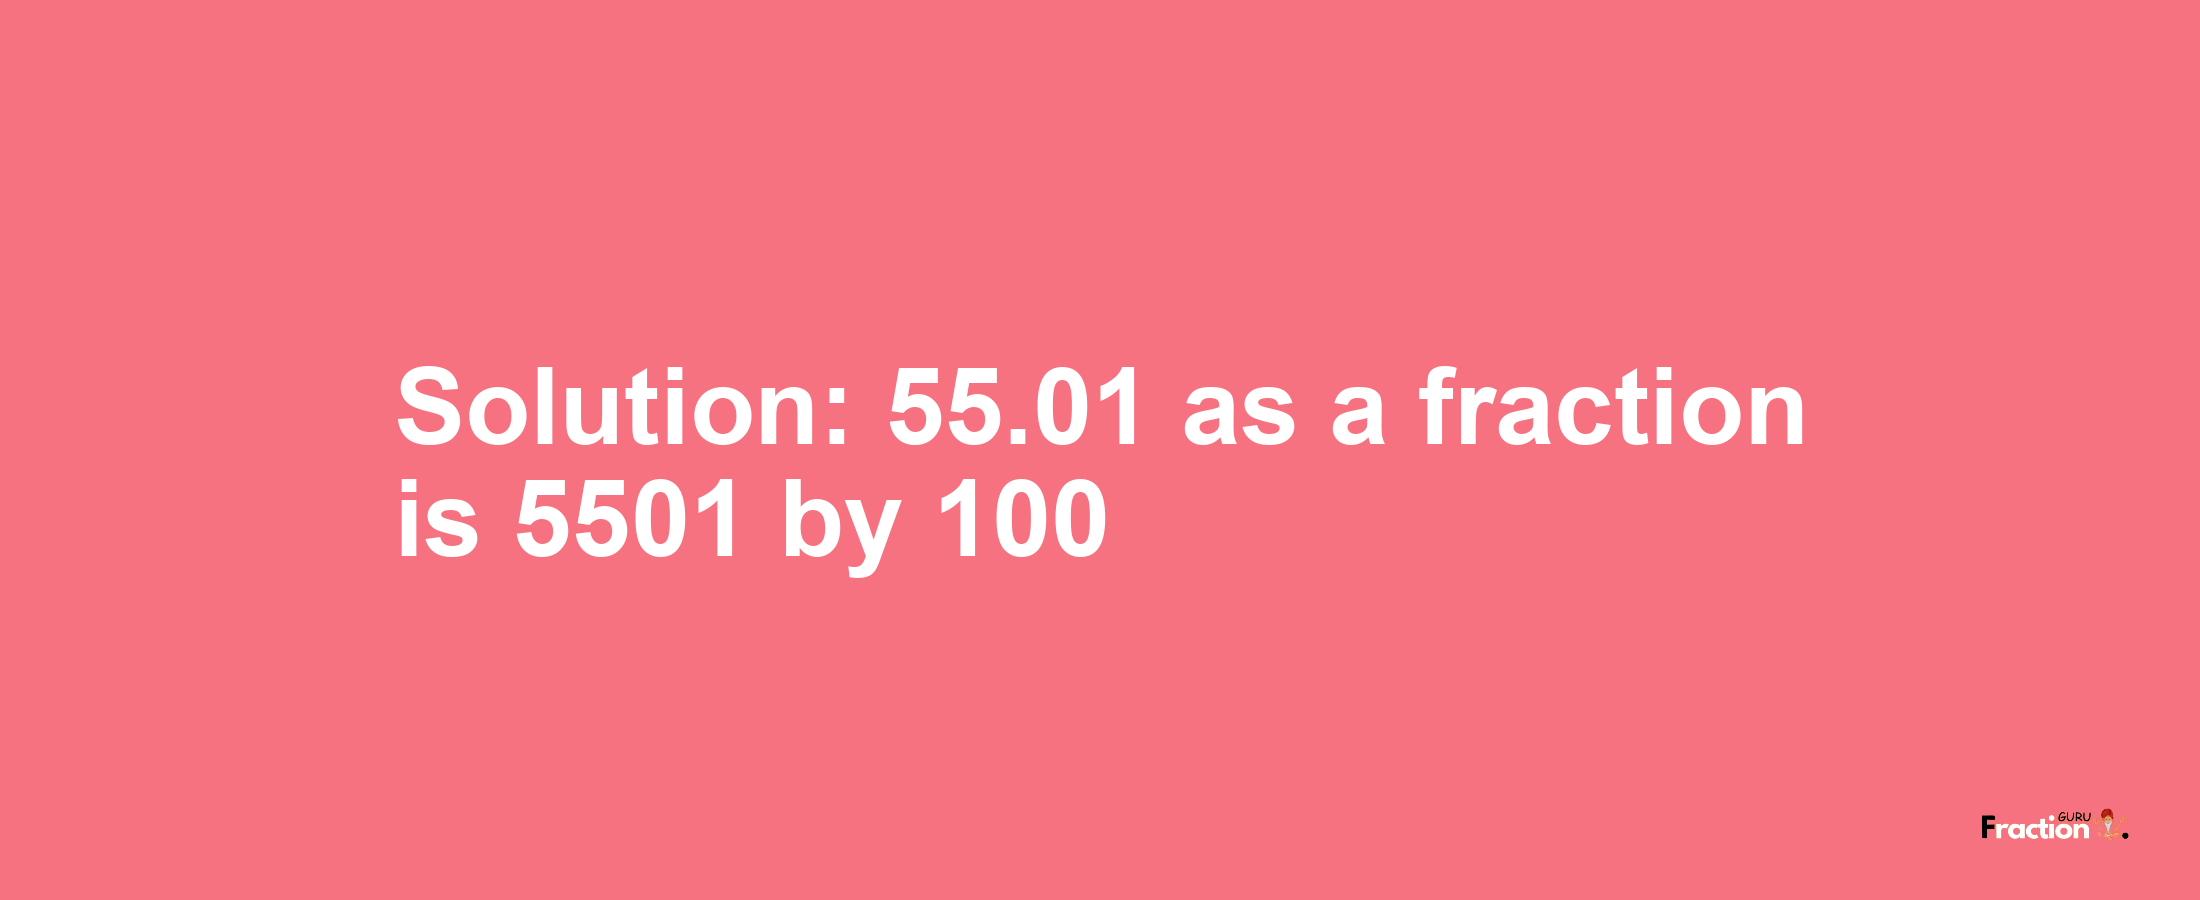 Solution:55.01 as a fraction is 5501/100